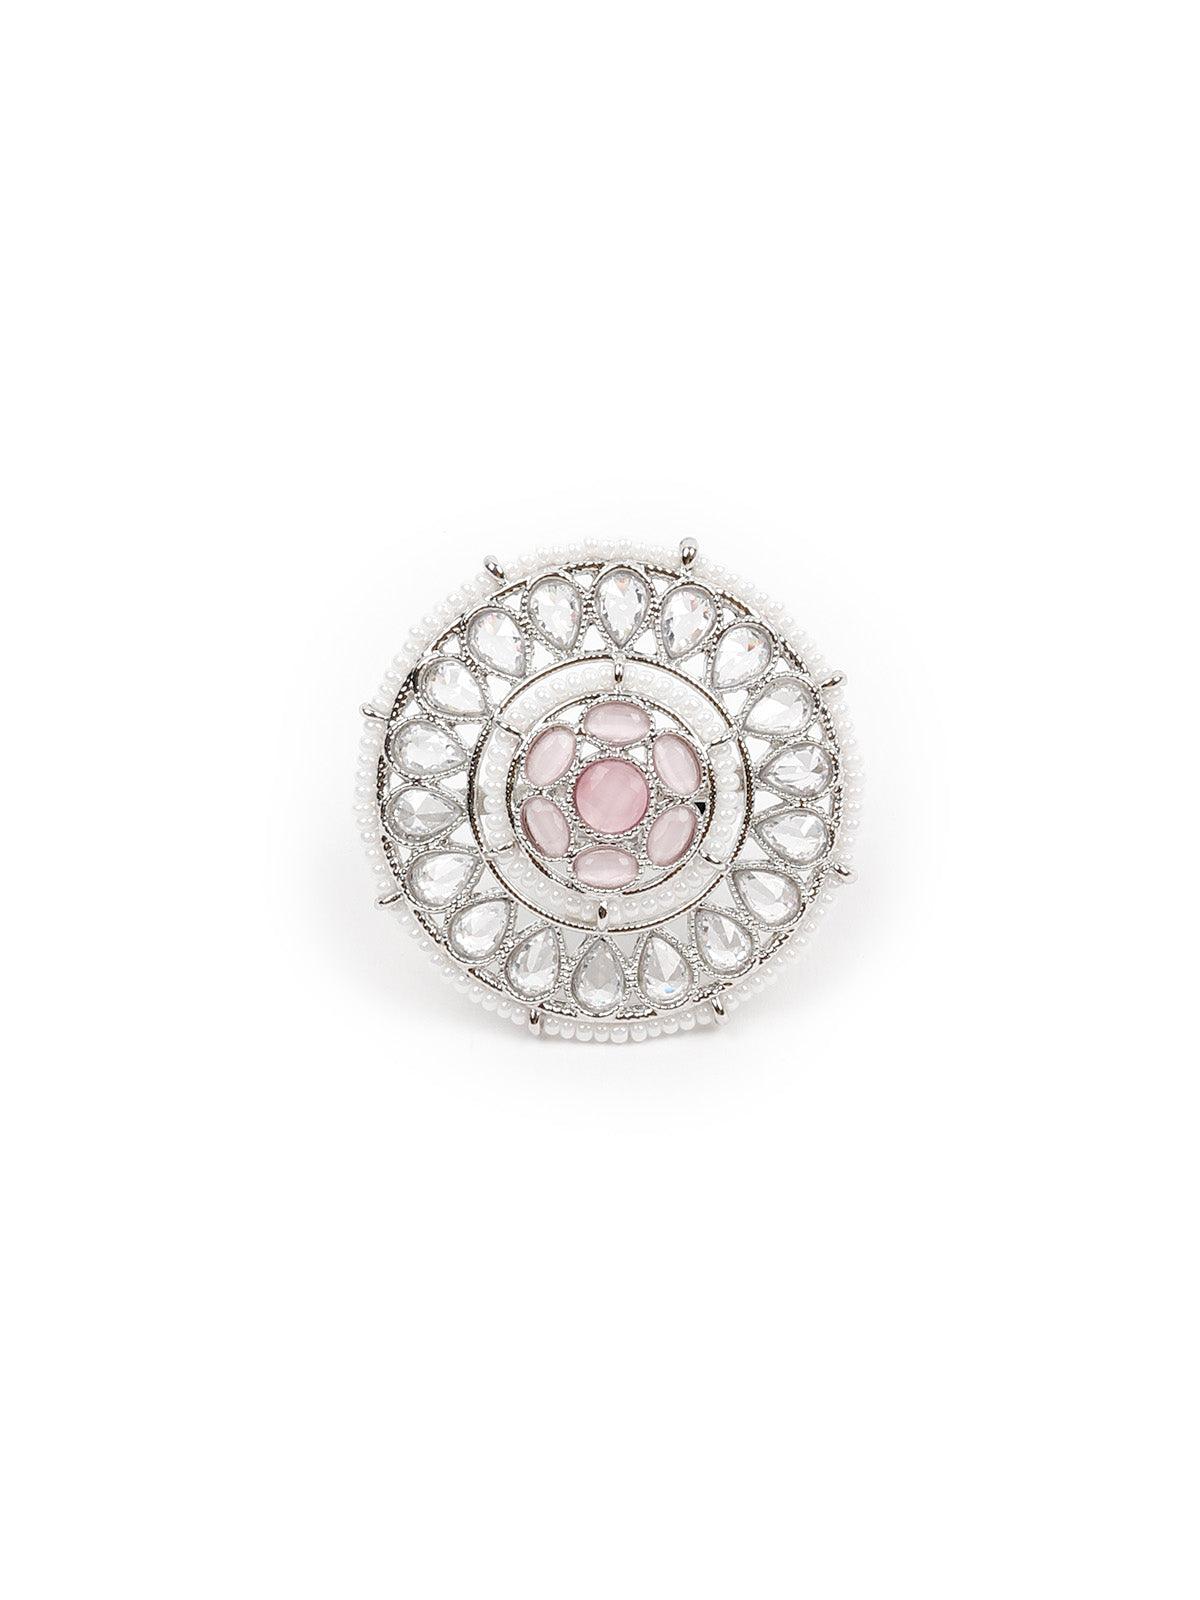 Women's Pretty White And Pink Embellished Finger Ring - Odette